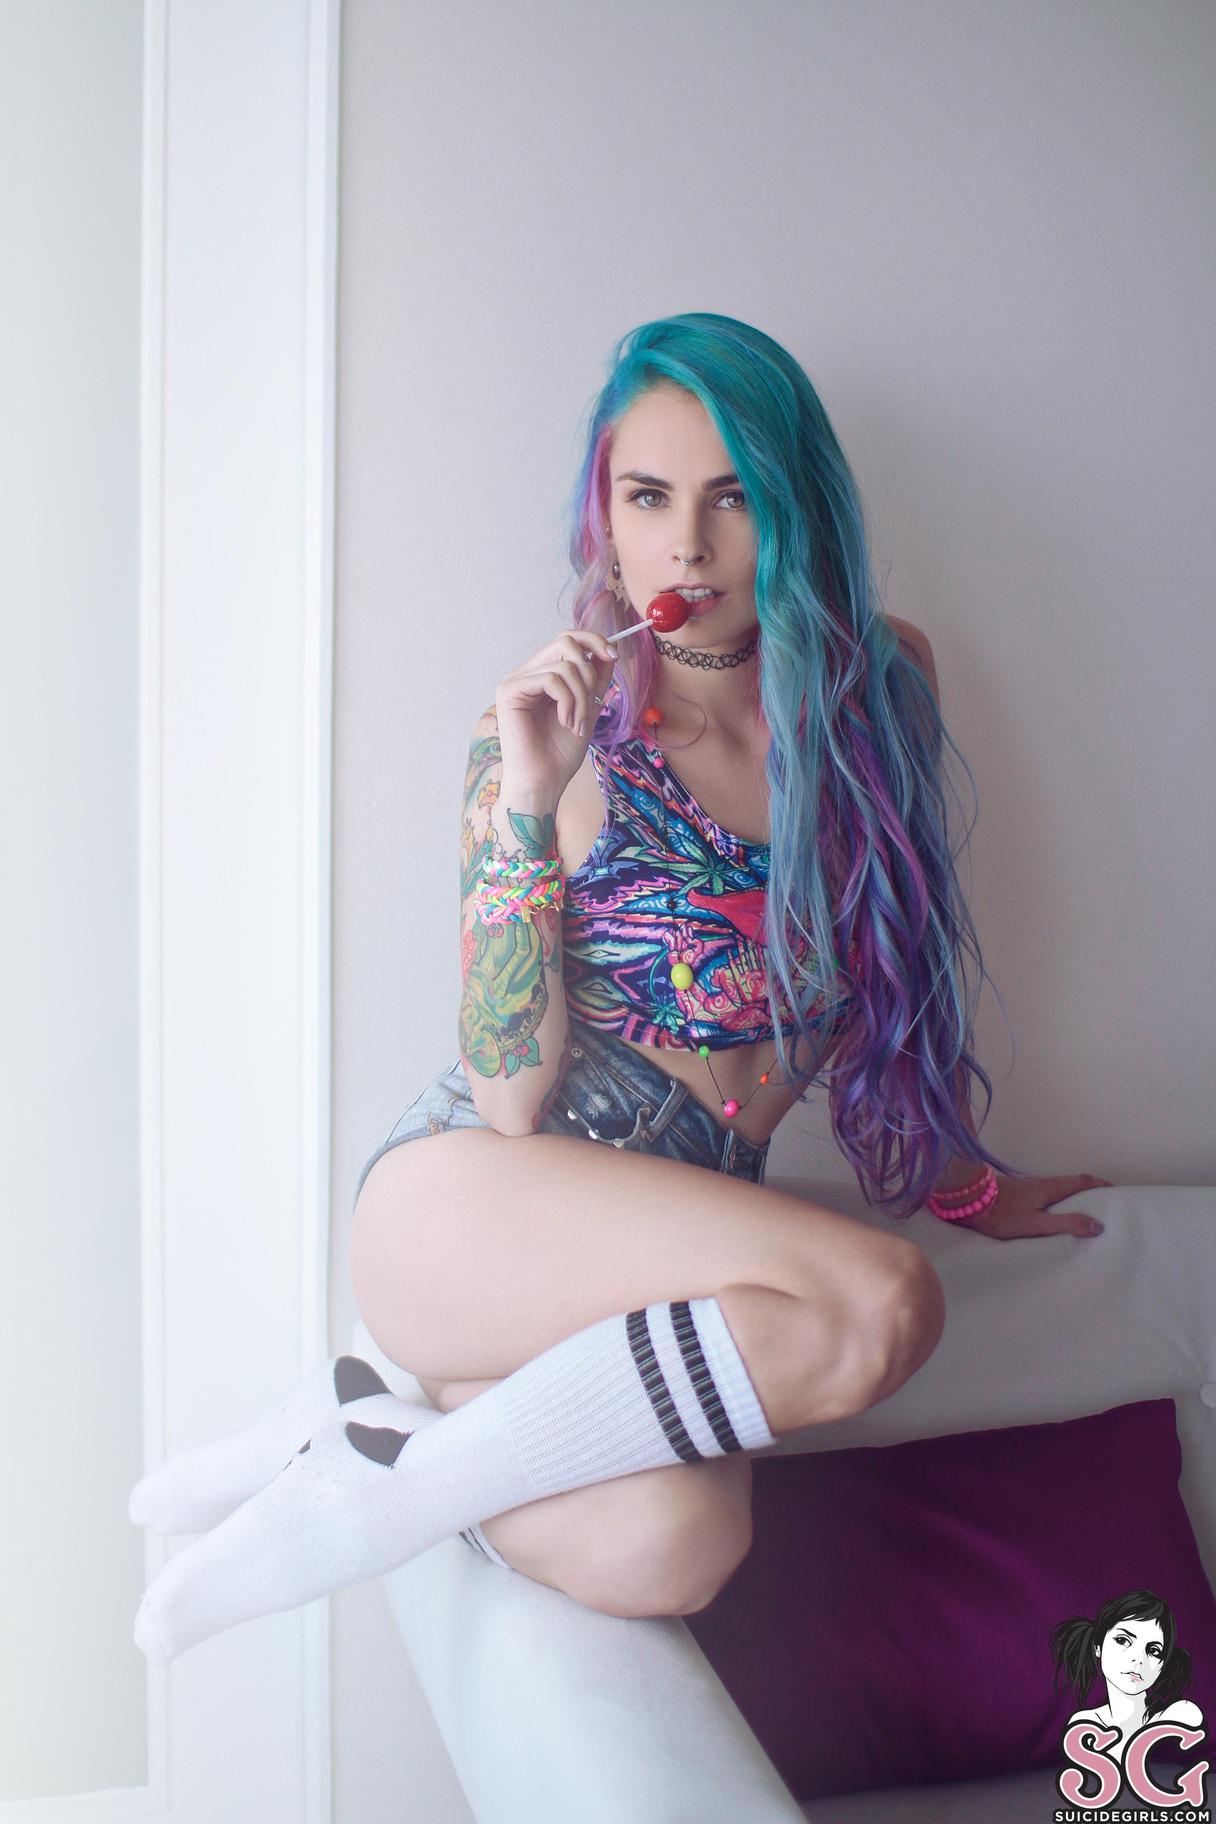 SuicideGirls on Twitter: Ginebra Suicide is the vision of 